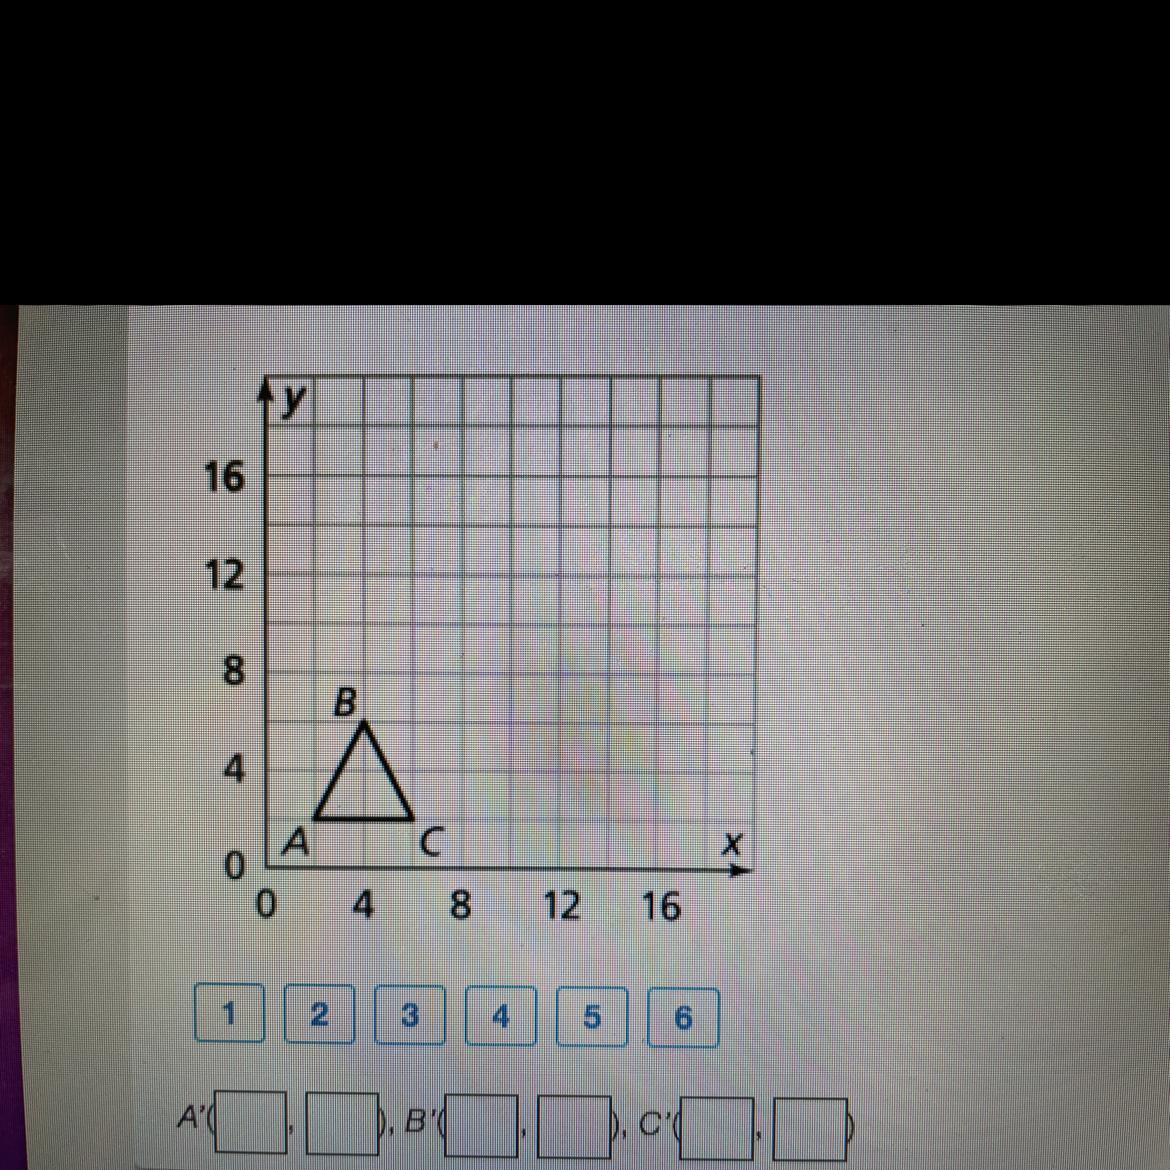 What Are The Coordinates Of The Image Of ABC After A Dilation With Center (0, 0) And A Scale Factor Of